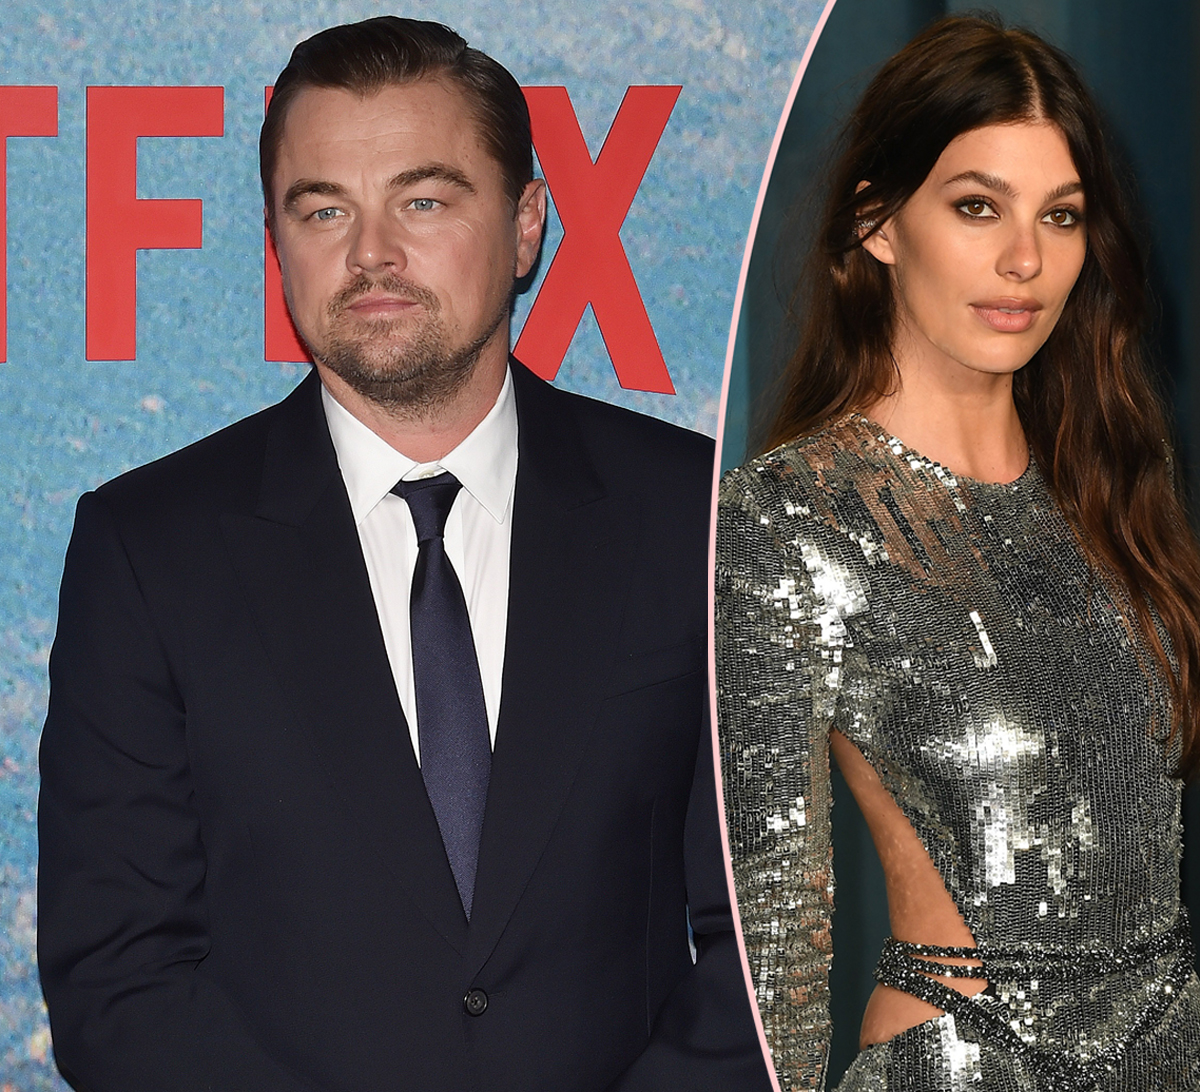 The Internet's Reaction To Leonardo DiCaprio's Breakup Is Equally Harsh & Hilarious!